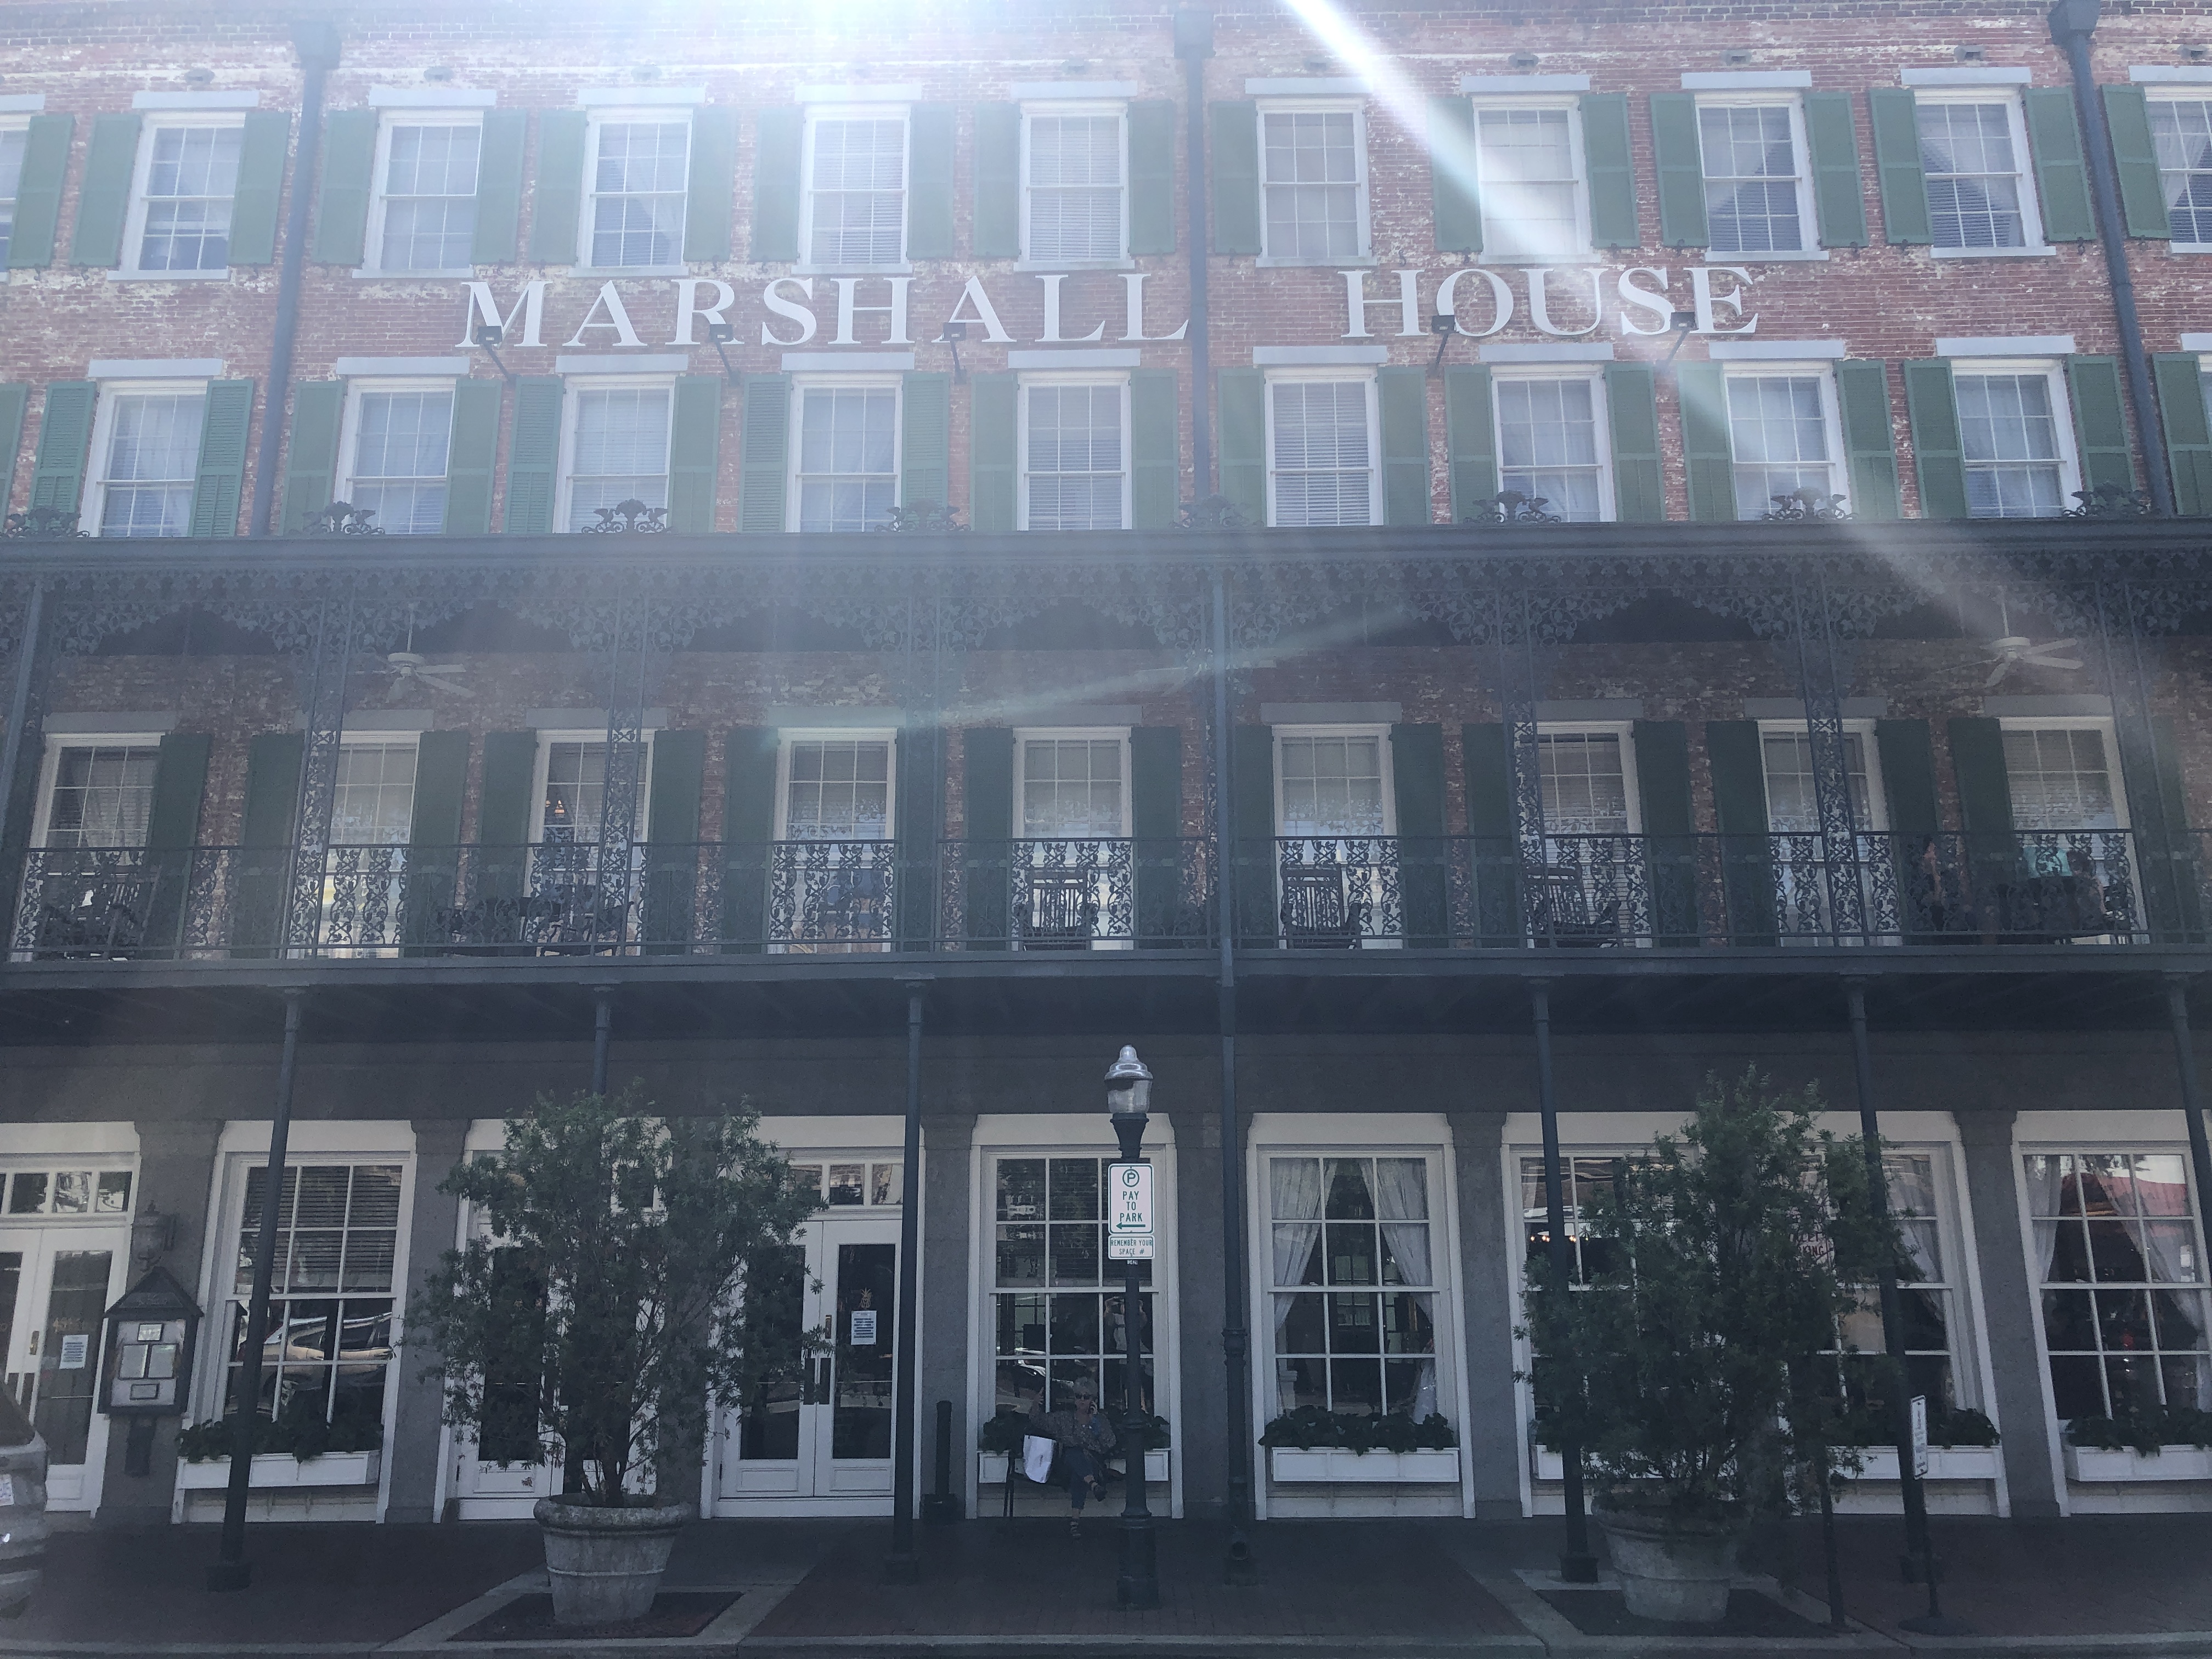 Marshall House Hotel - #1 Ghost Tour